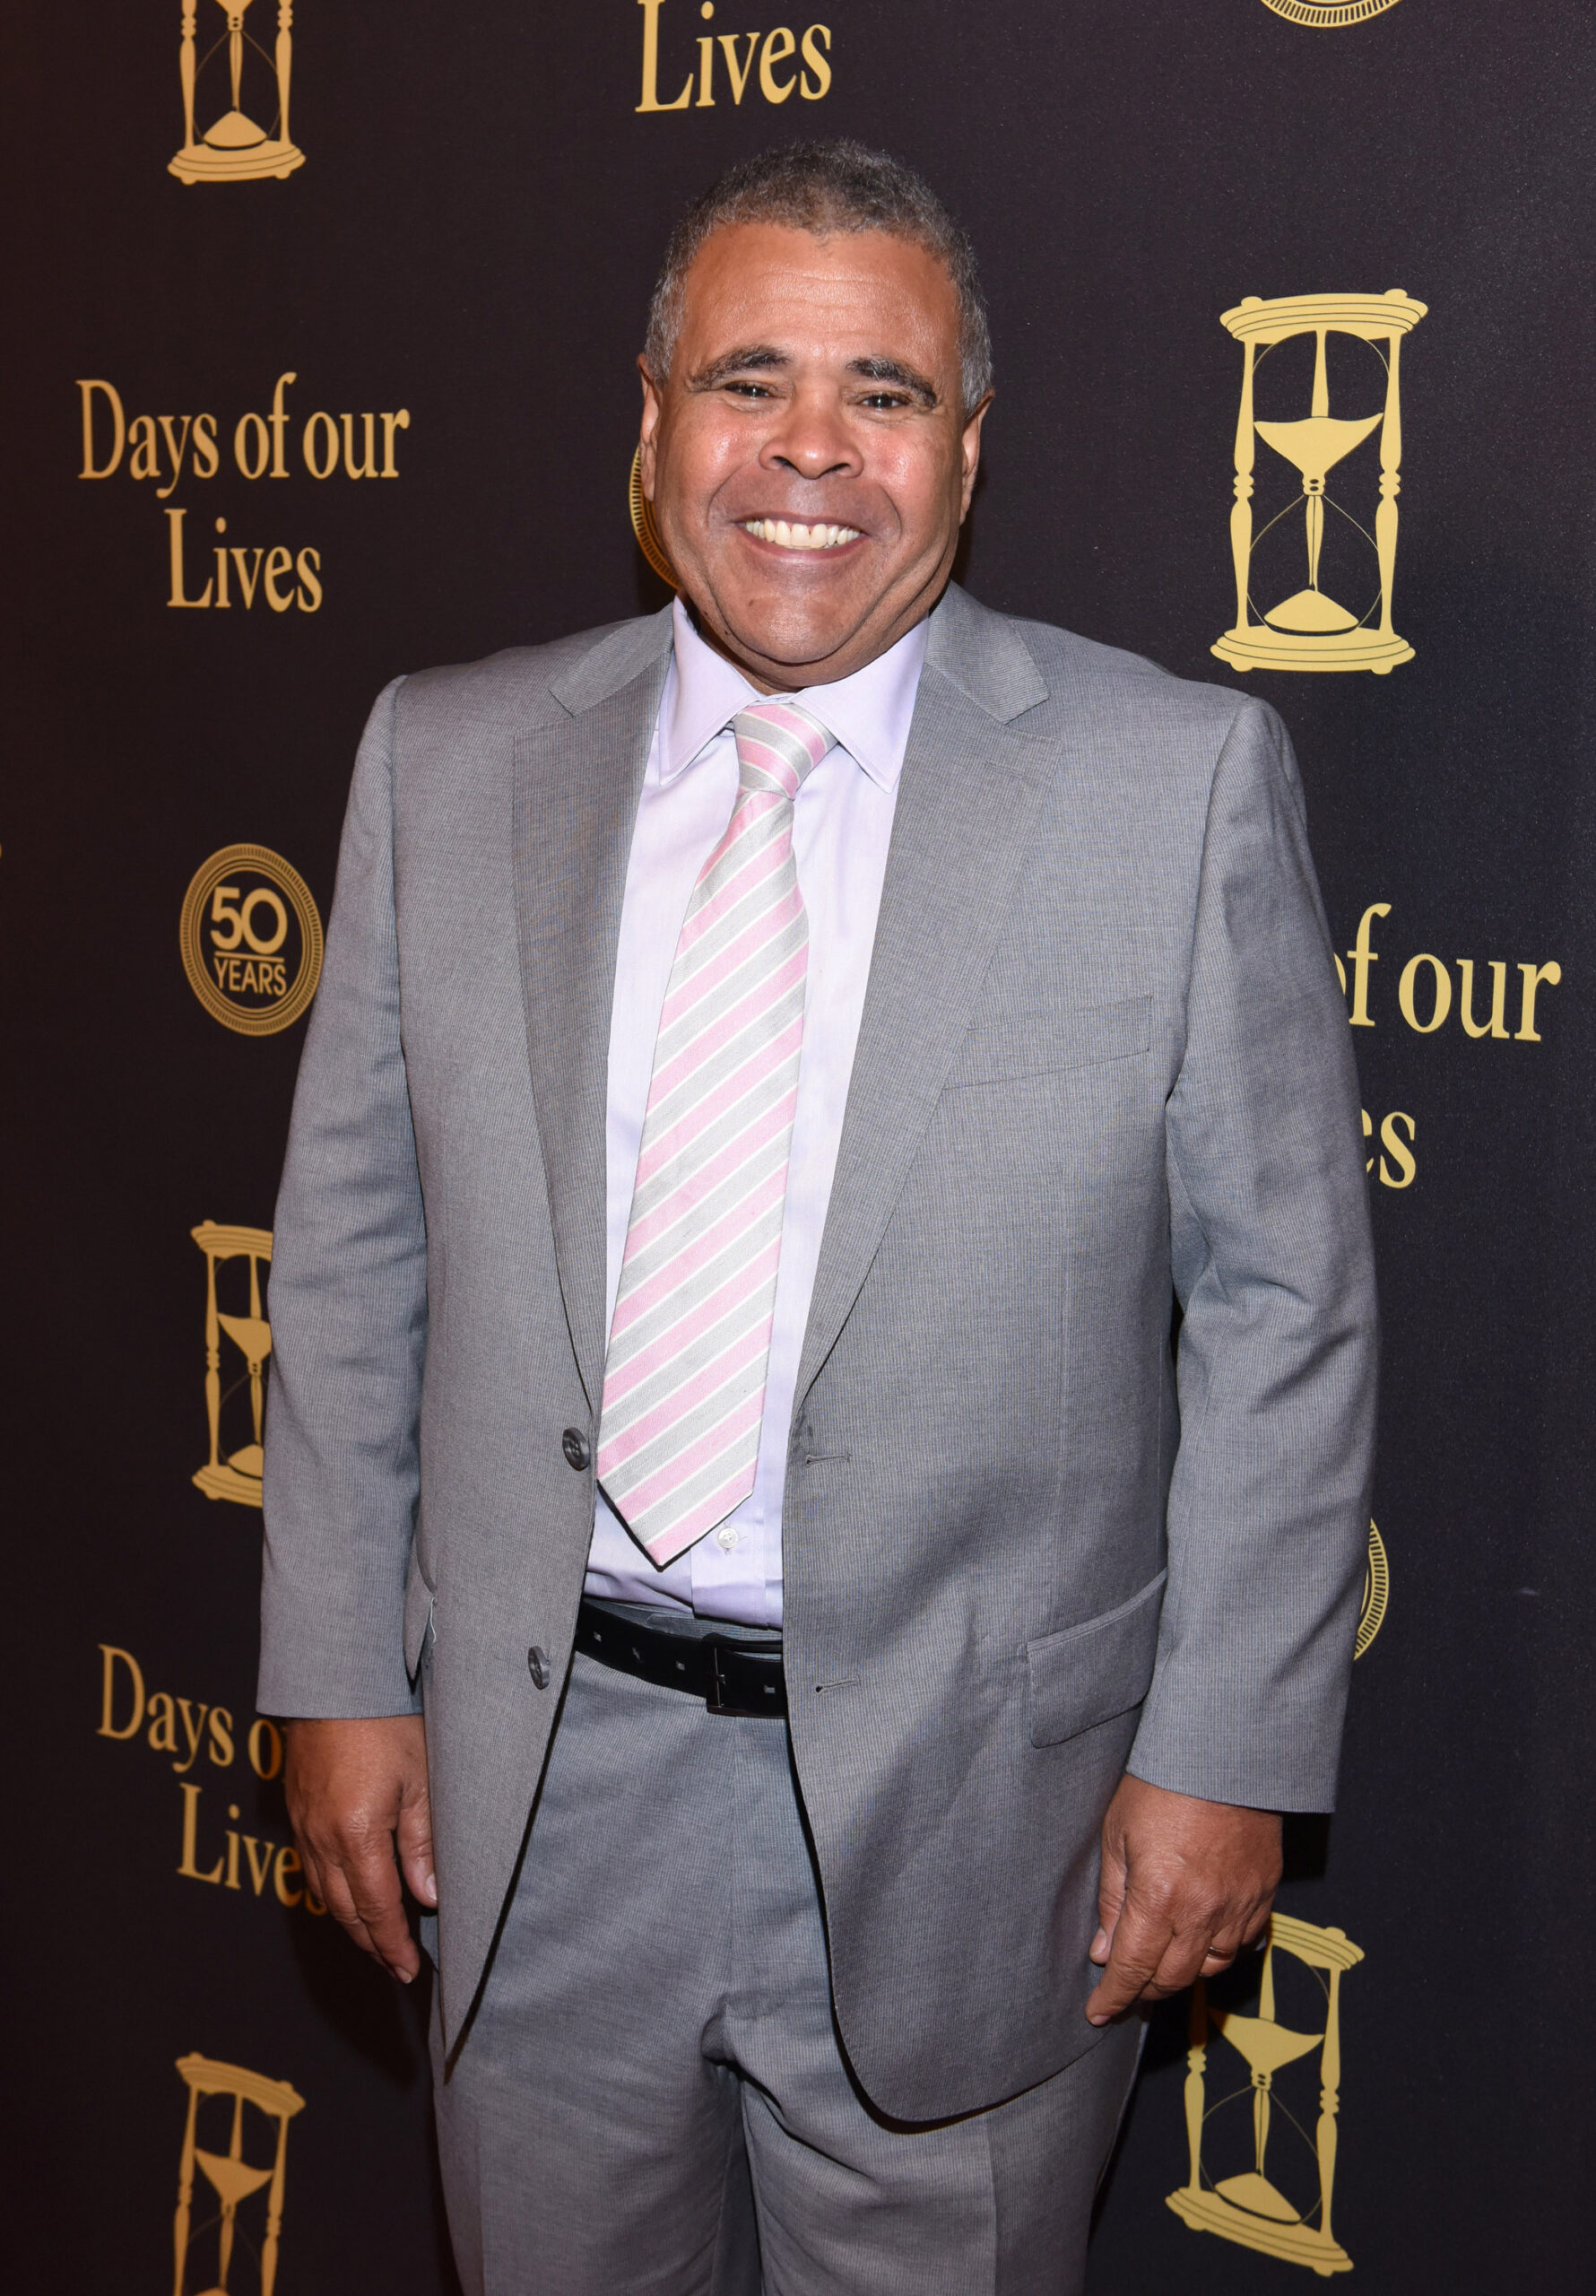 ‘days of our lives’ boss albert alarr hit with workplace misconduct allegations